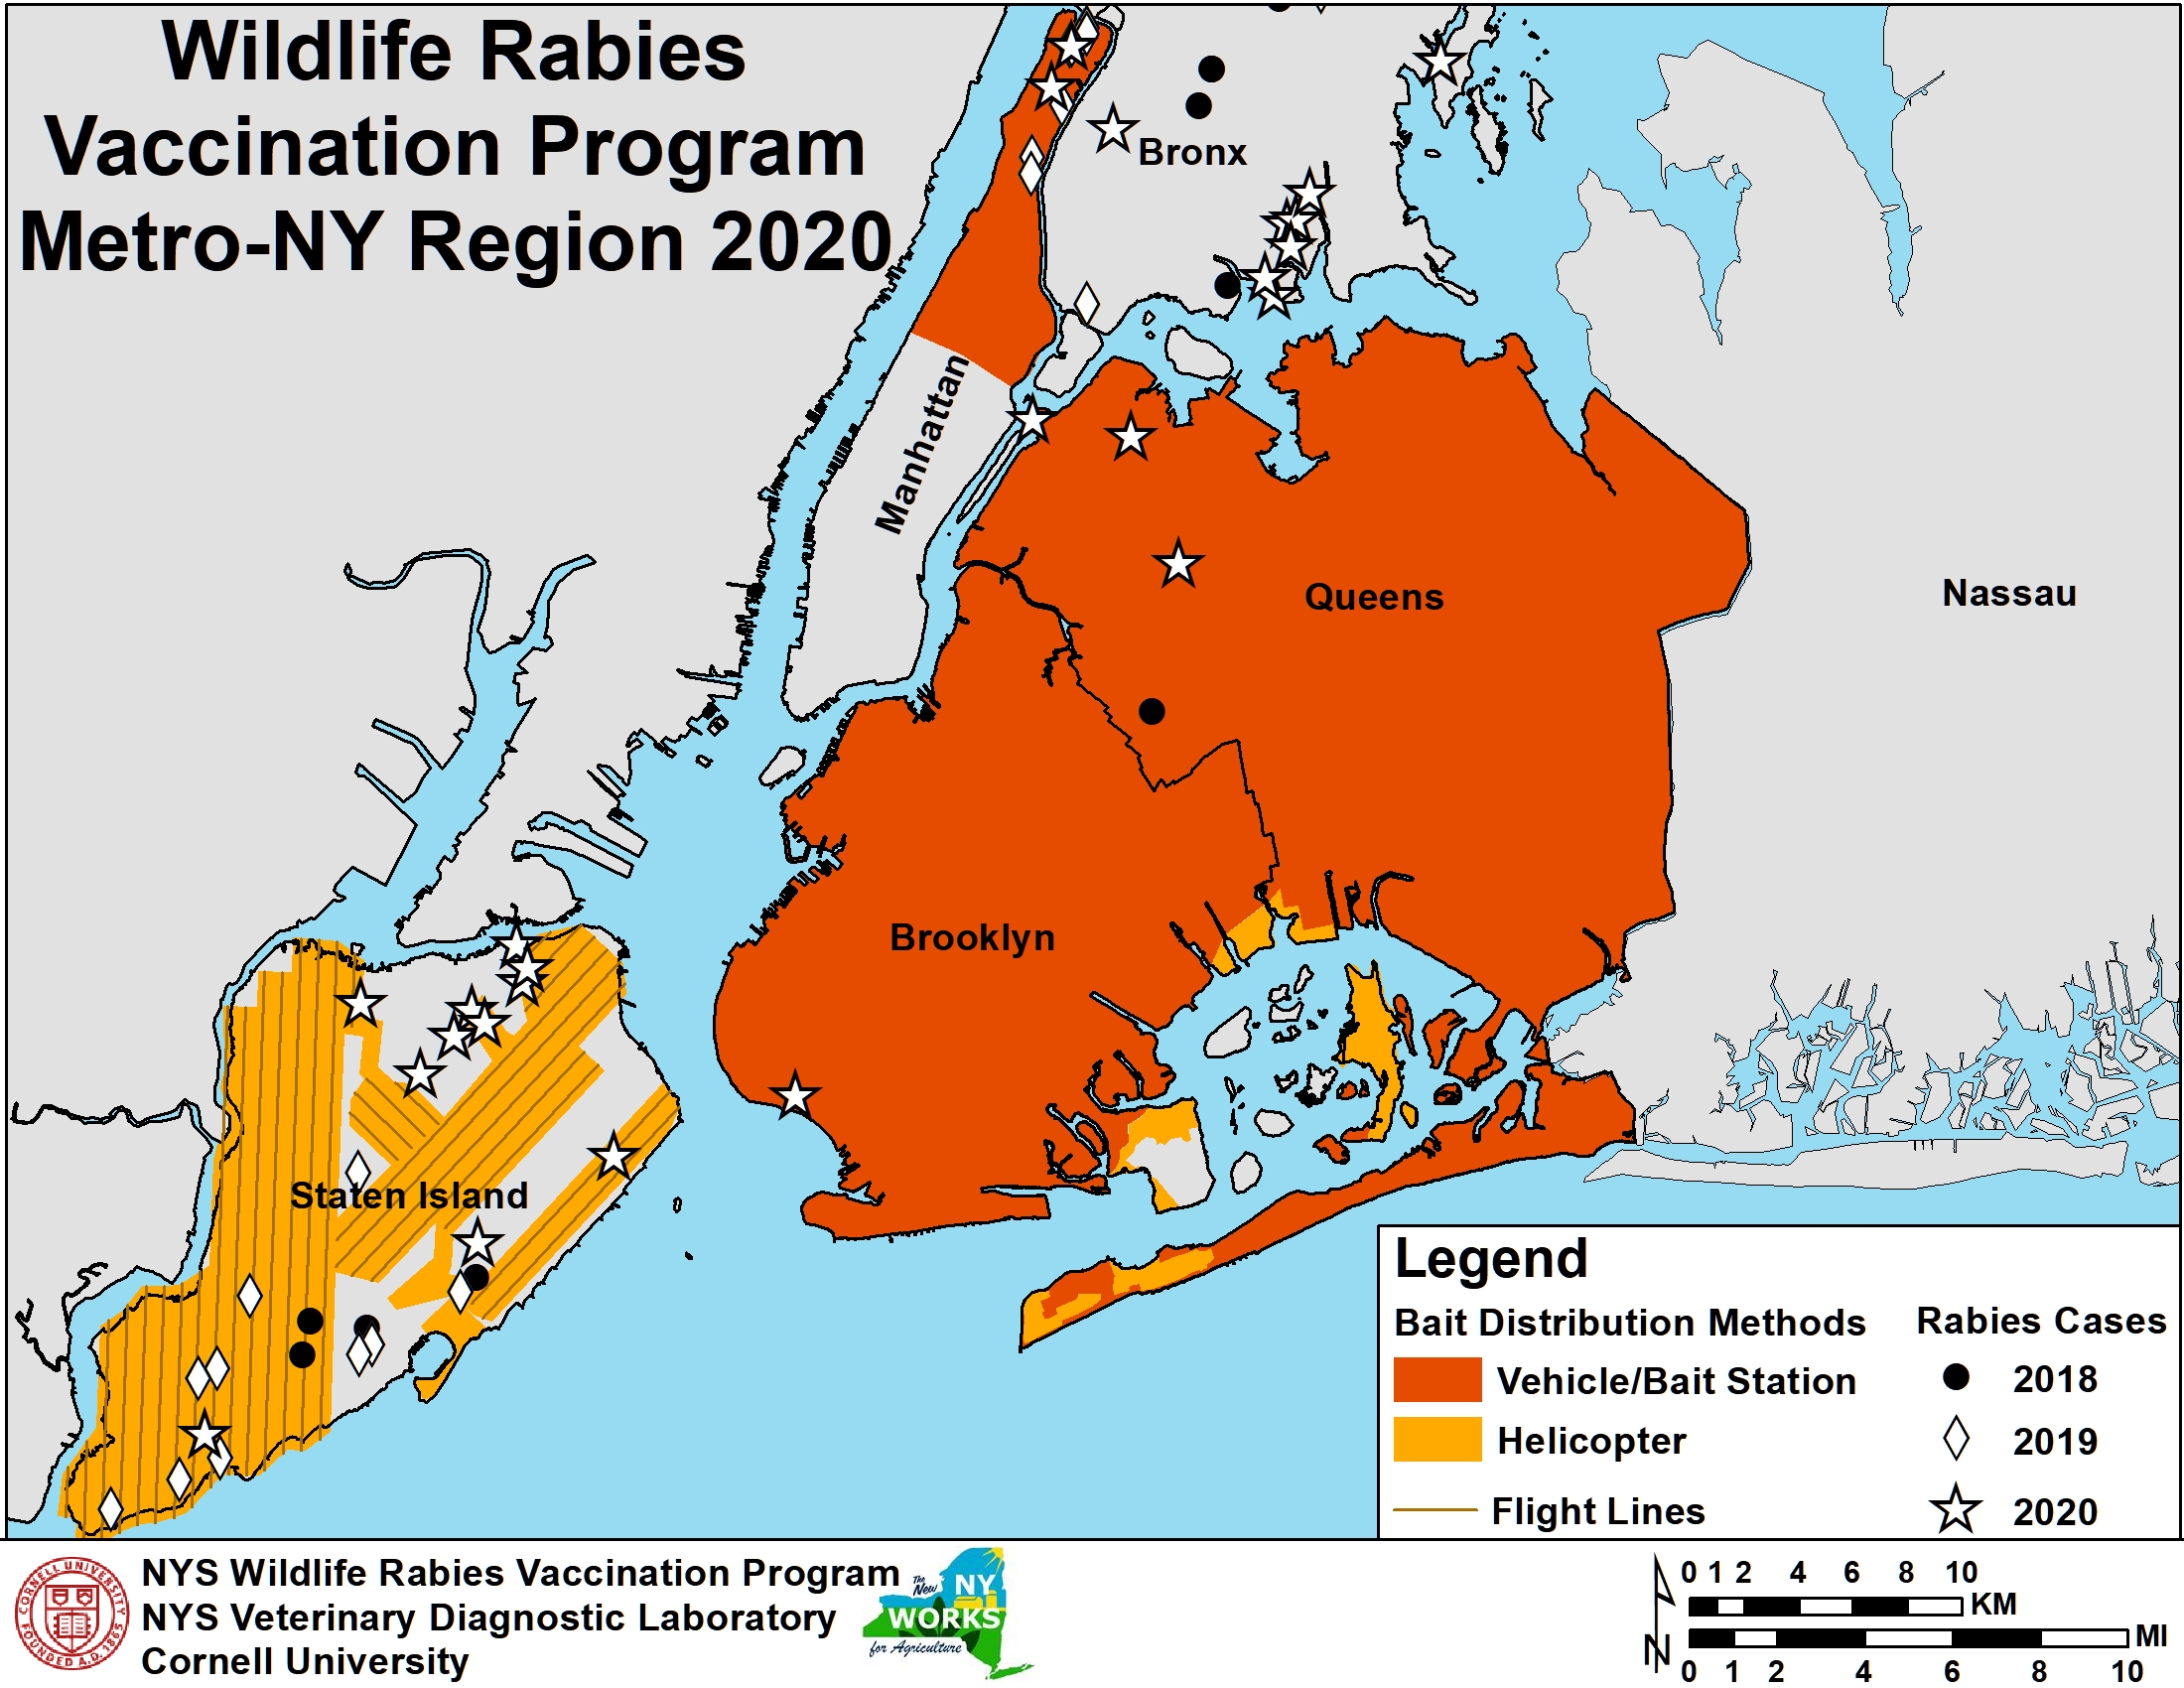 A map of all five boroughs. Brooklyn, Queens and Harlem's vaccinations are being distributed through vehicle/belt stations. Staten Island's vaccinations are being distributed by helicopter.